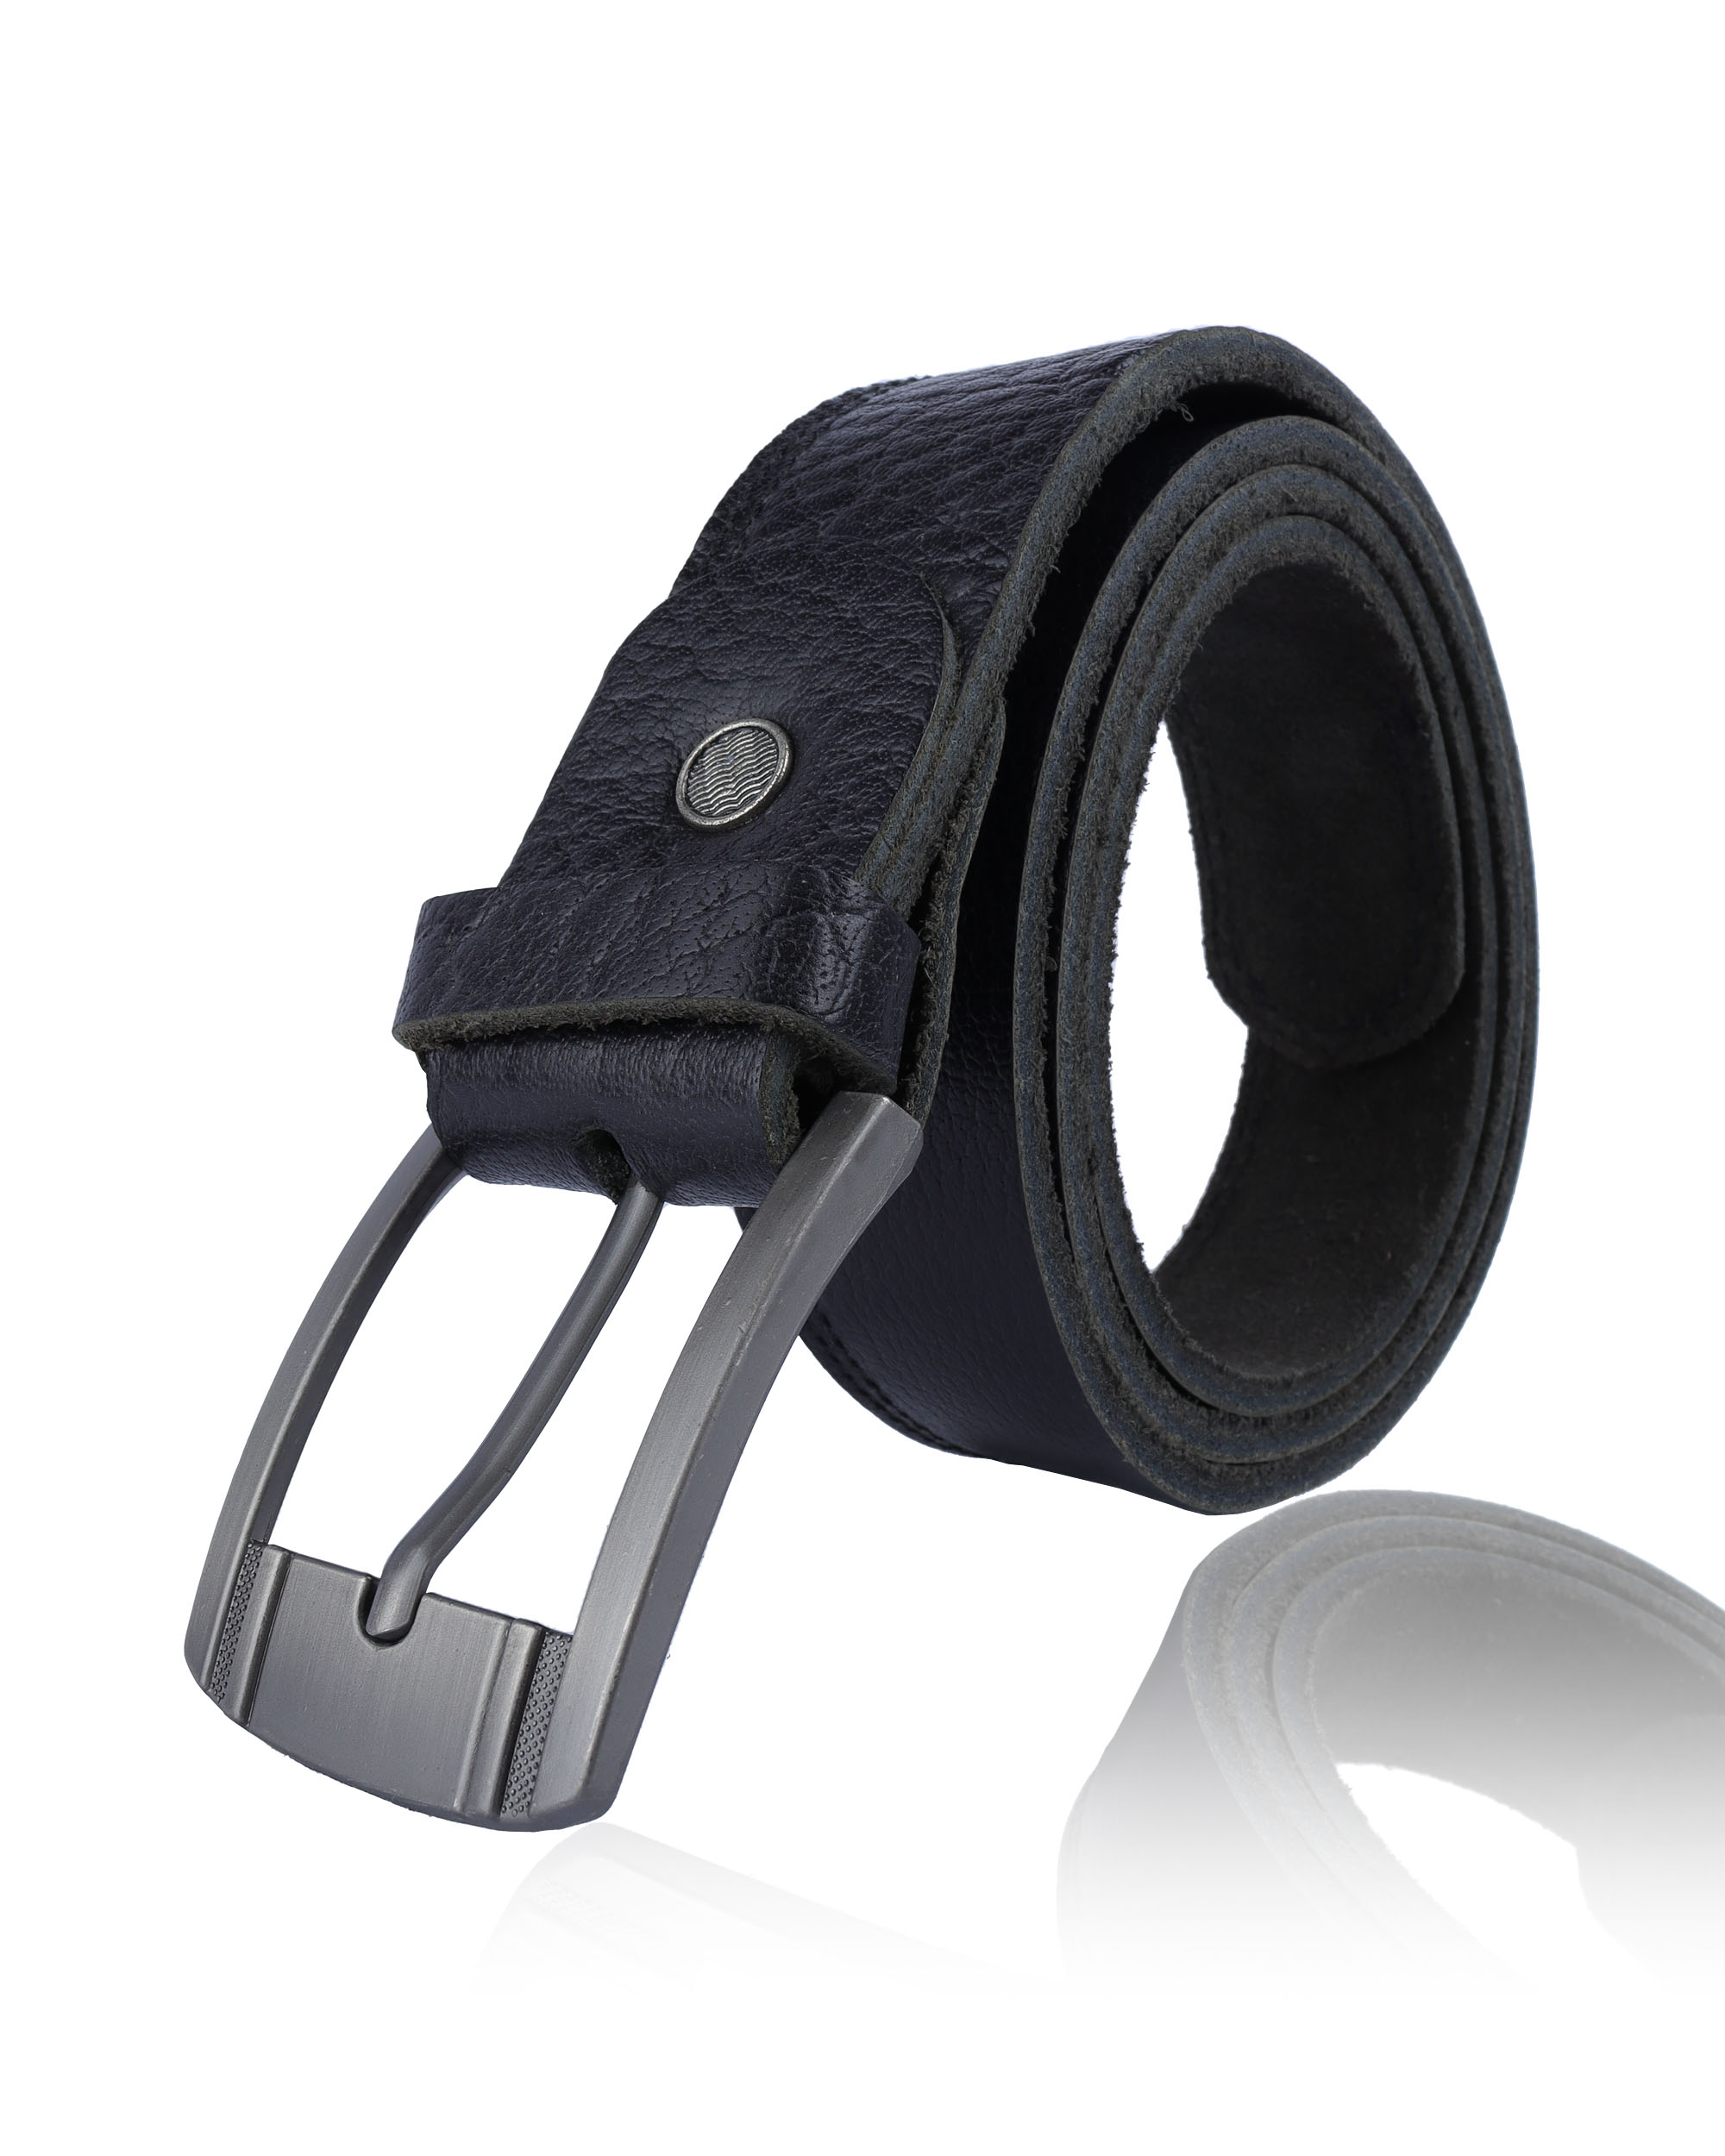 Men's Leather Belt With Stylish Buckle